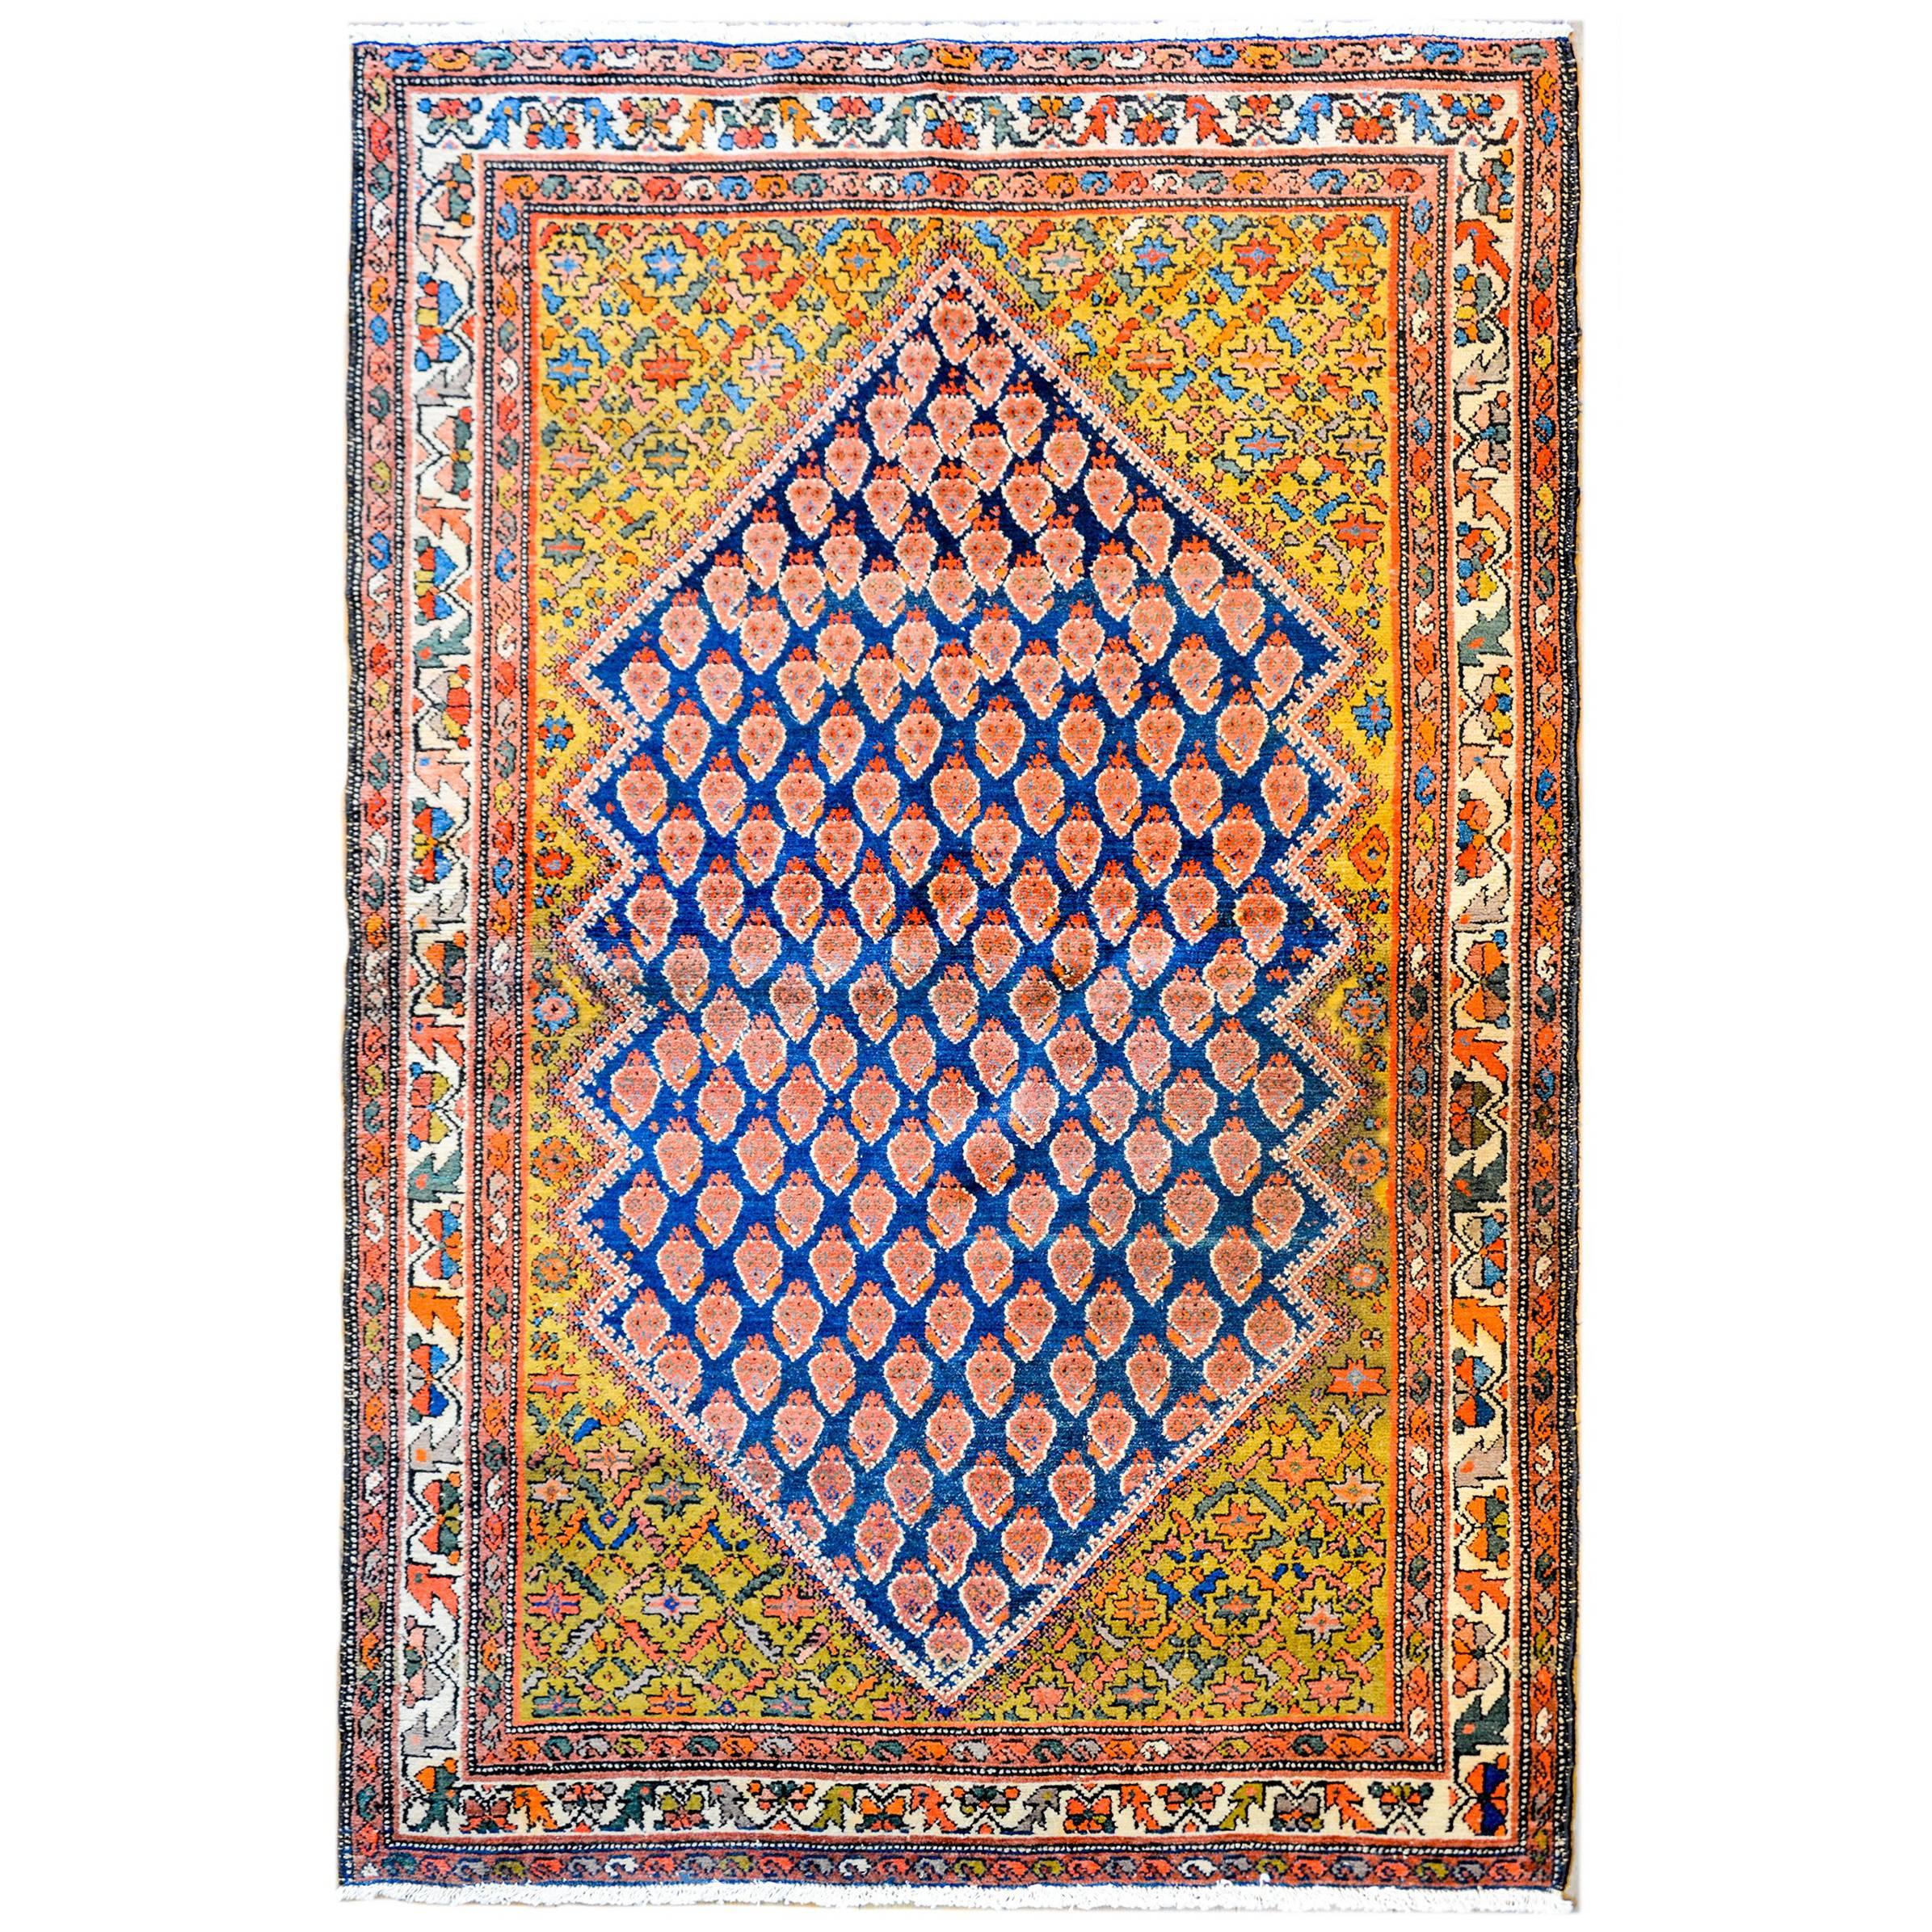 Outstanding Early 20th Century Malayer Rug